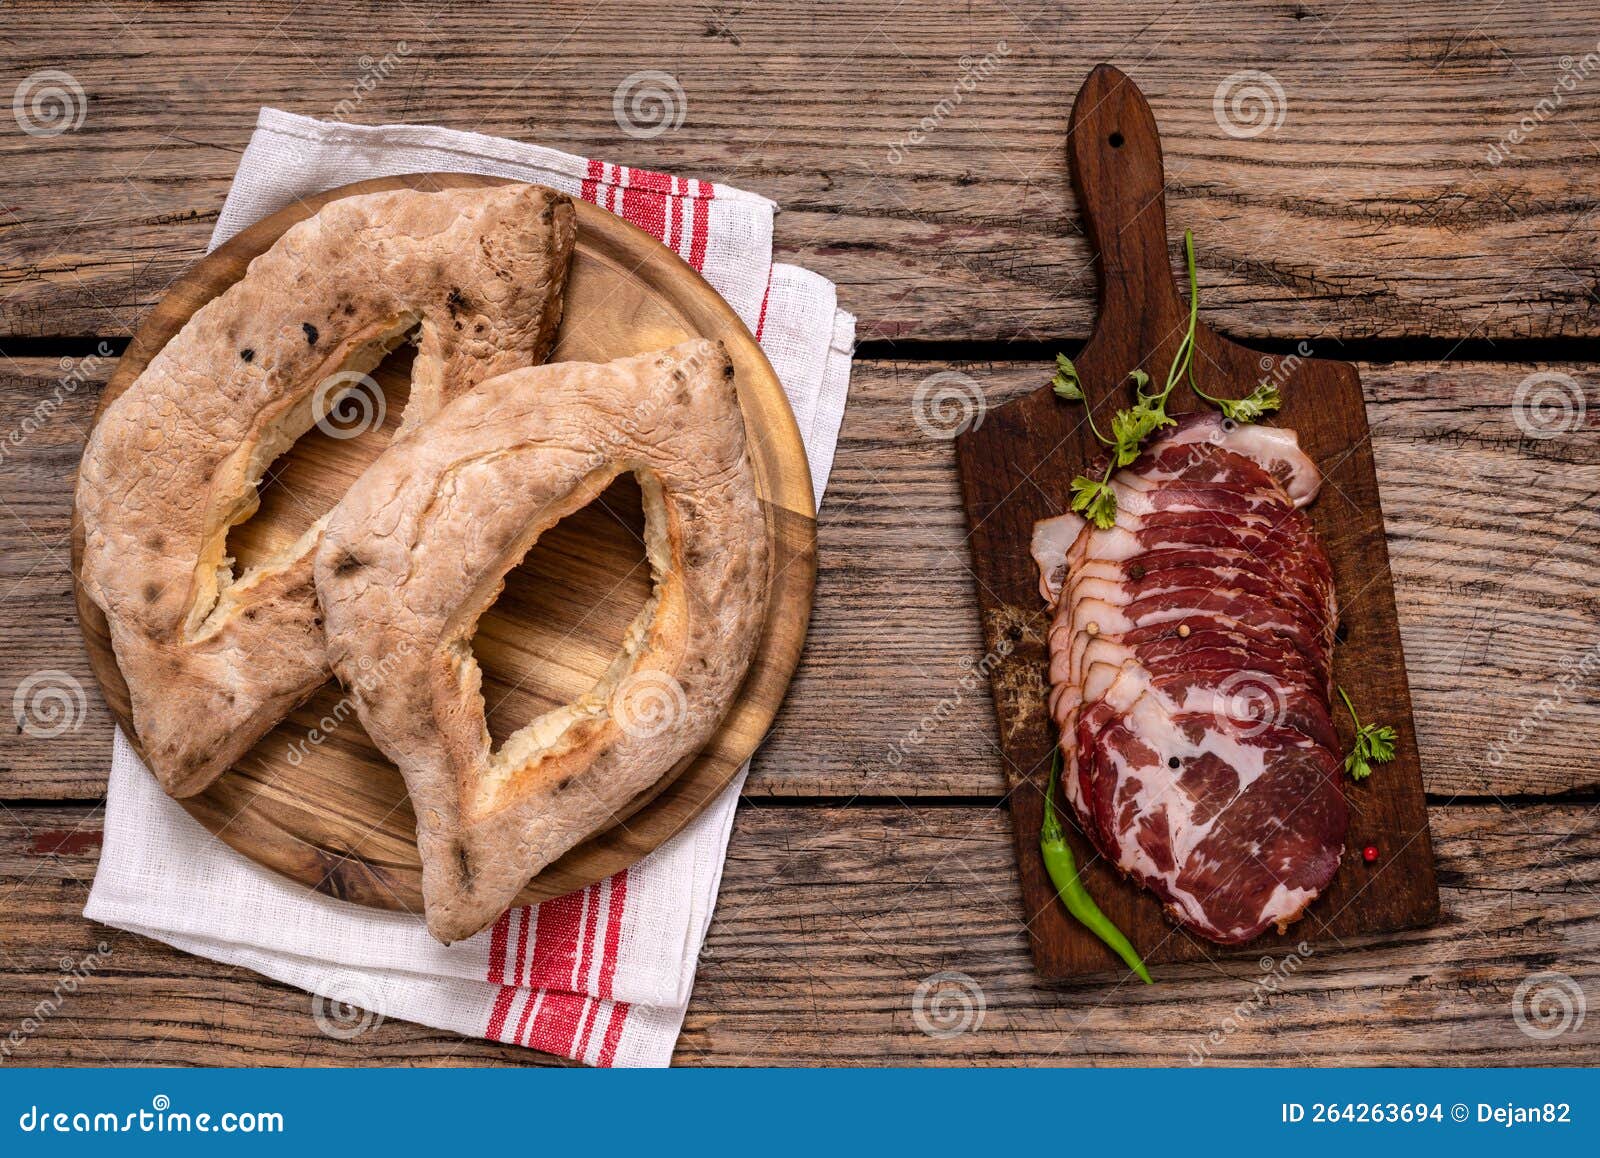 homemade lepinja bread and appetizer on wooden background